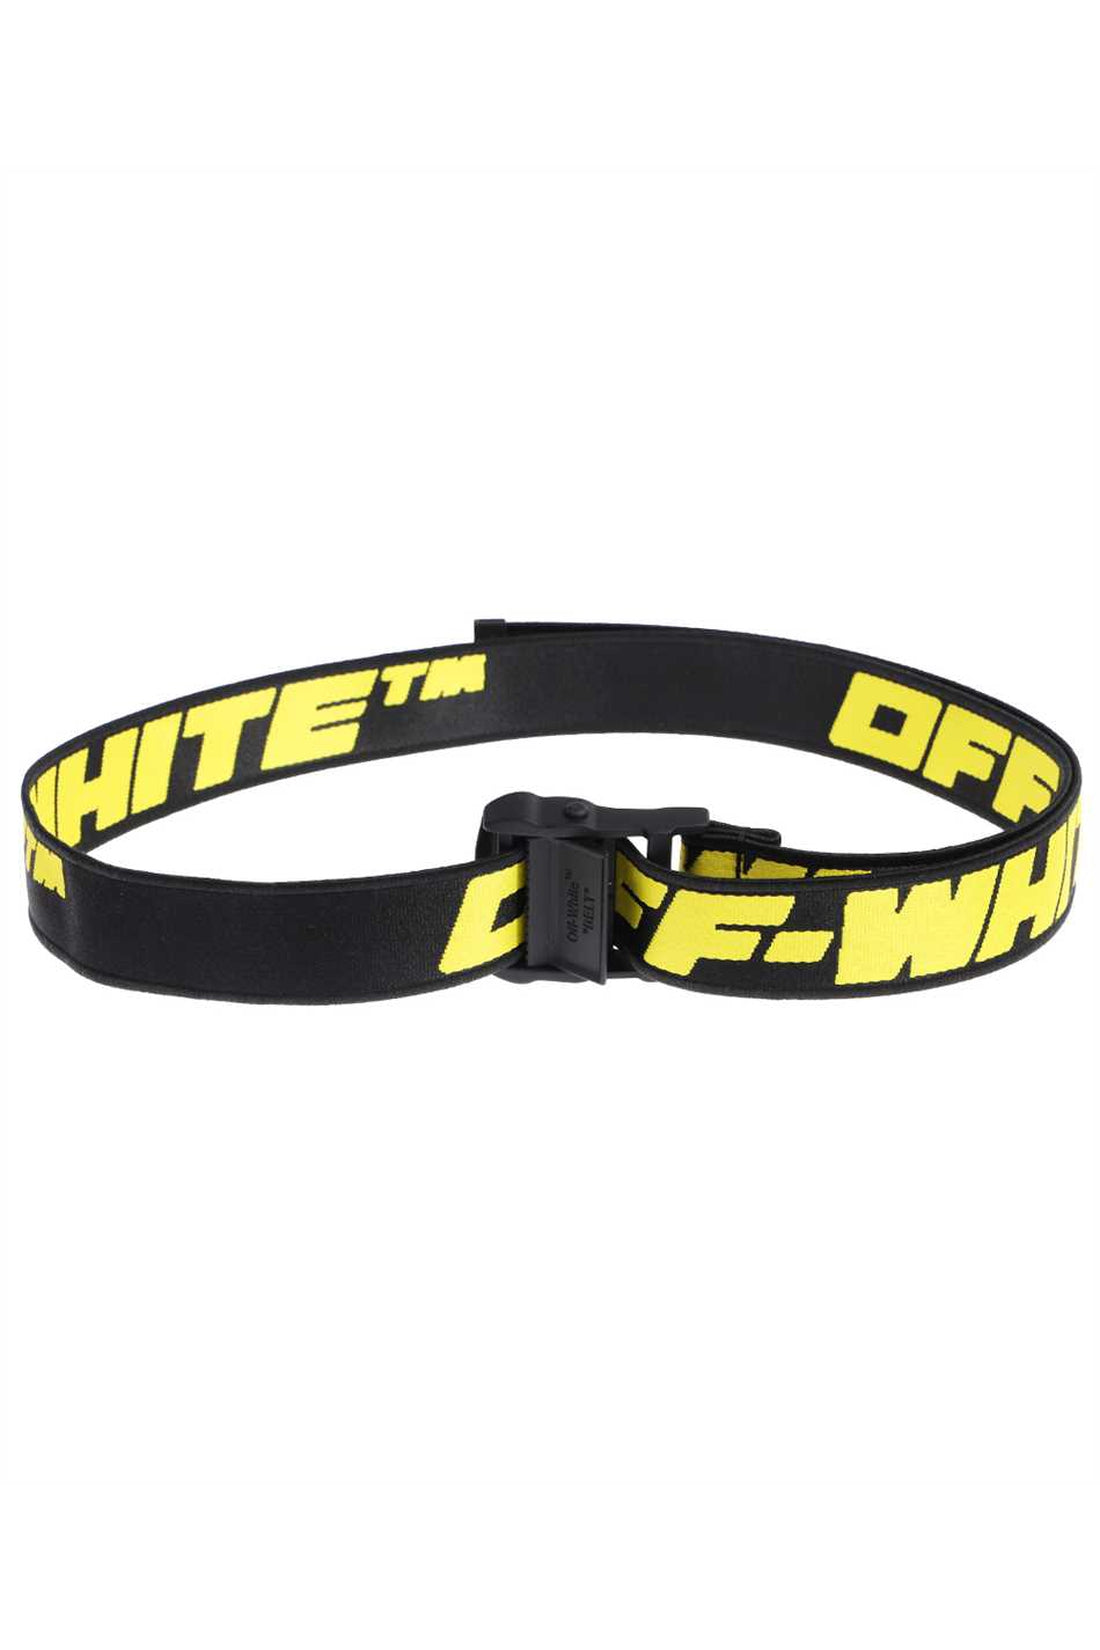 Off-White-OUTLET-SALE-Industrial fabric belt-ARCHIVIST